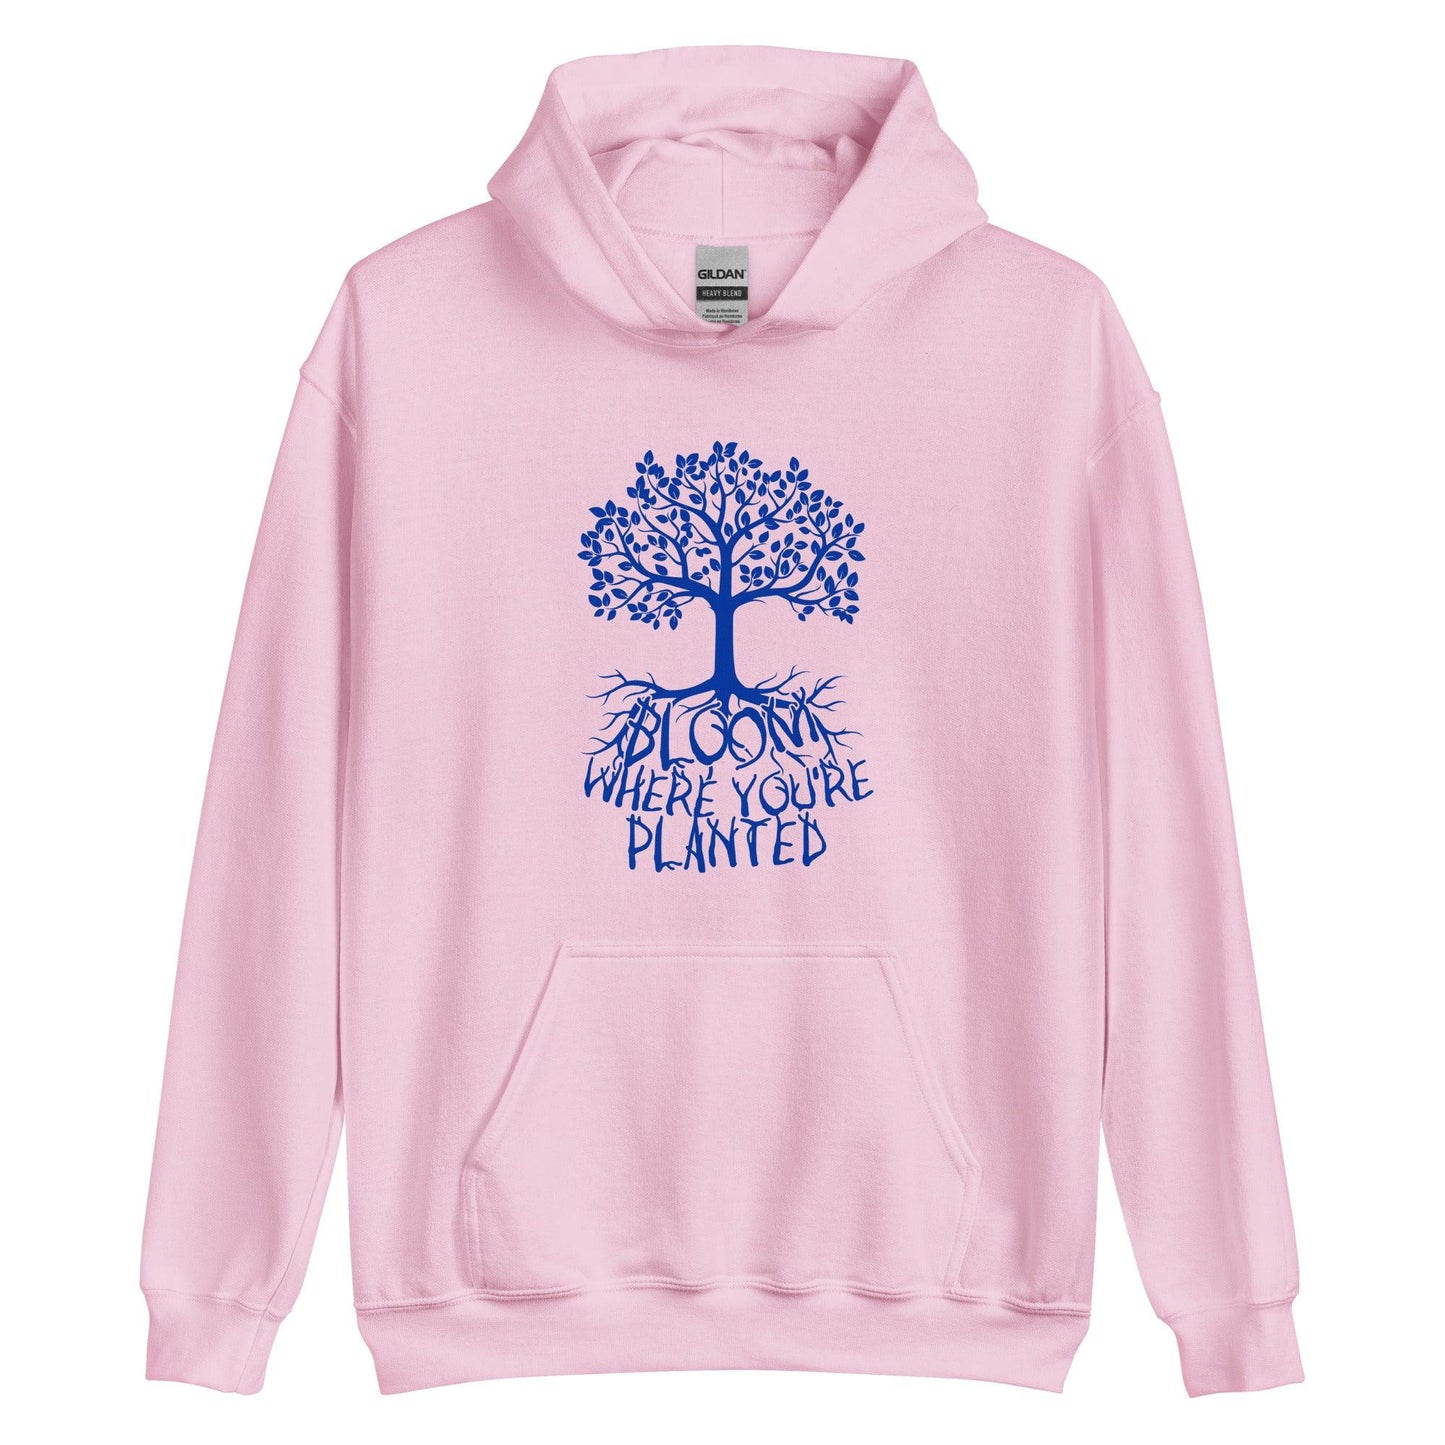 Nate Sestina "Where You're Planted" Hoodie - Fan Arch